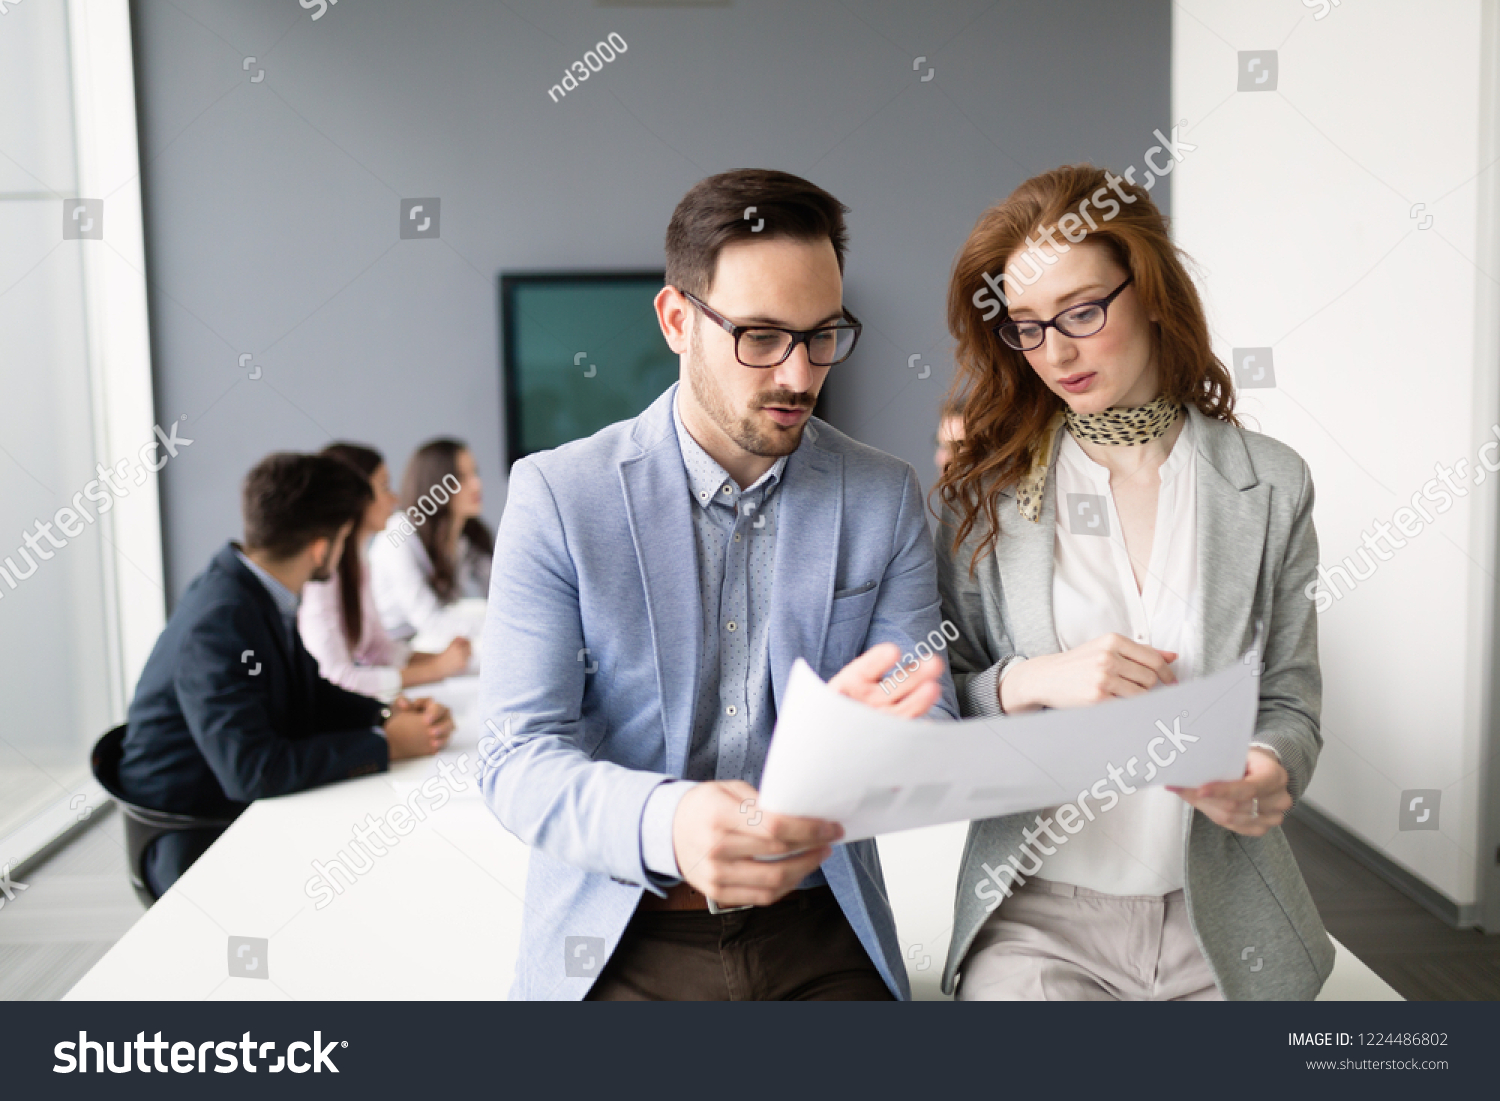 Business colleagues in conference room working together #1224486802